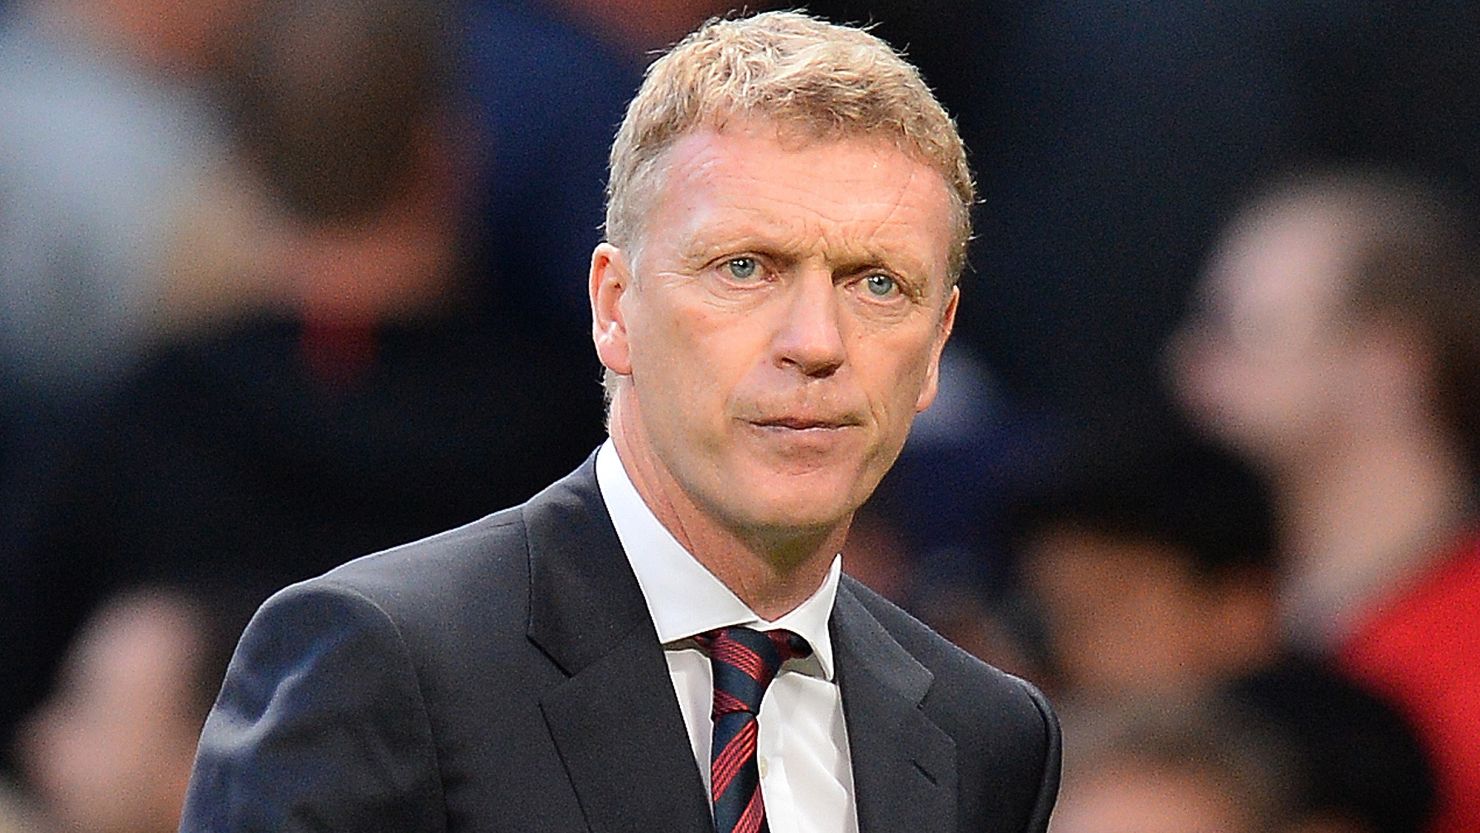 Manchester United manager David Moyes is struggling to make an immediate impact in his first season in charge.